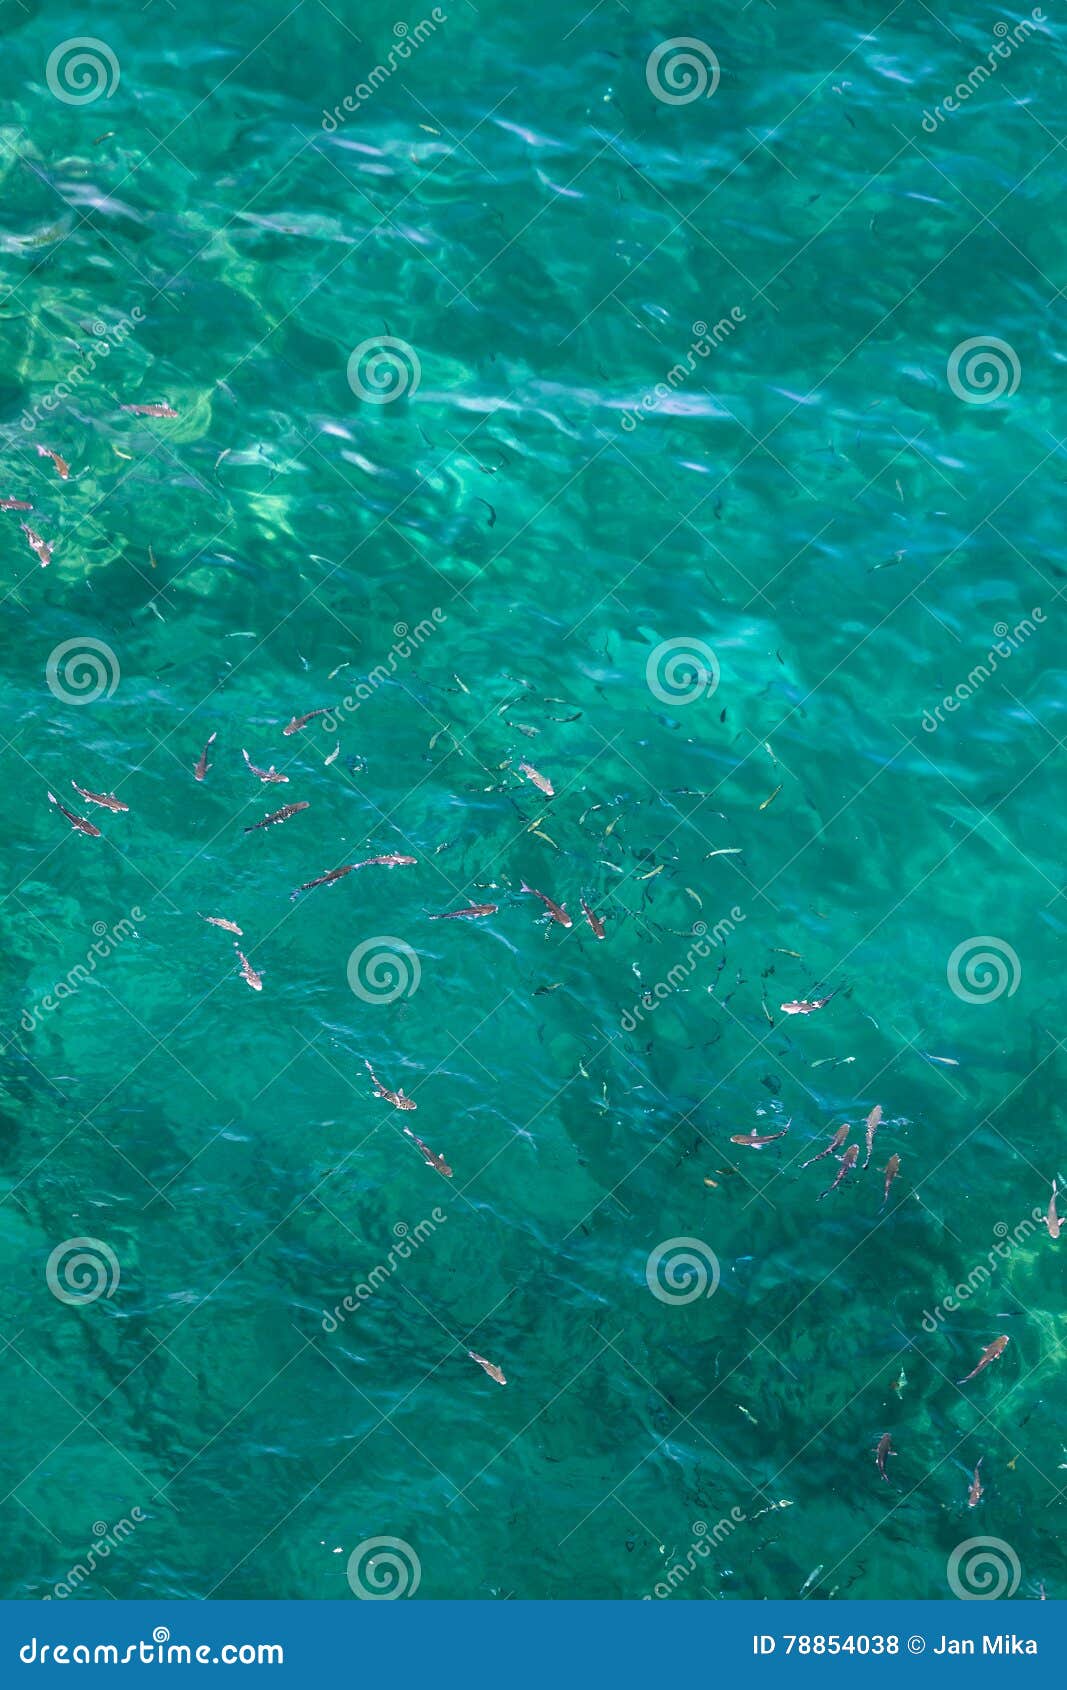 many fish on the surface of the alboran sea in the strait of gibraltar